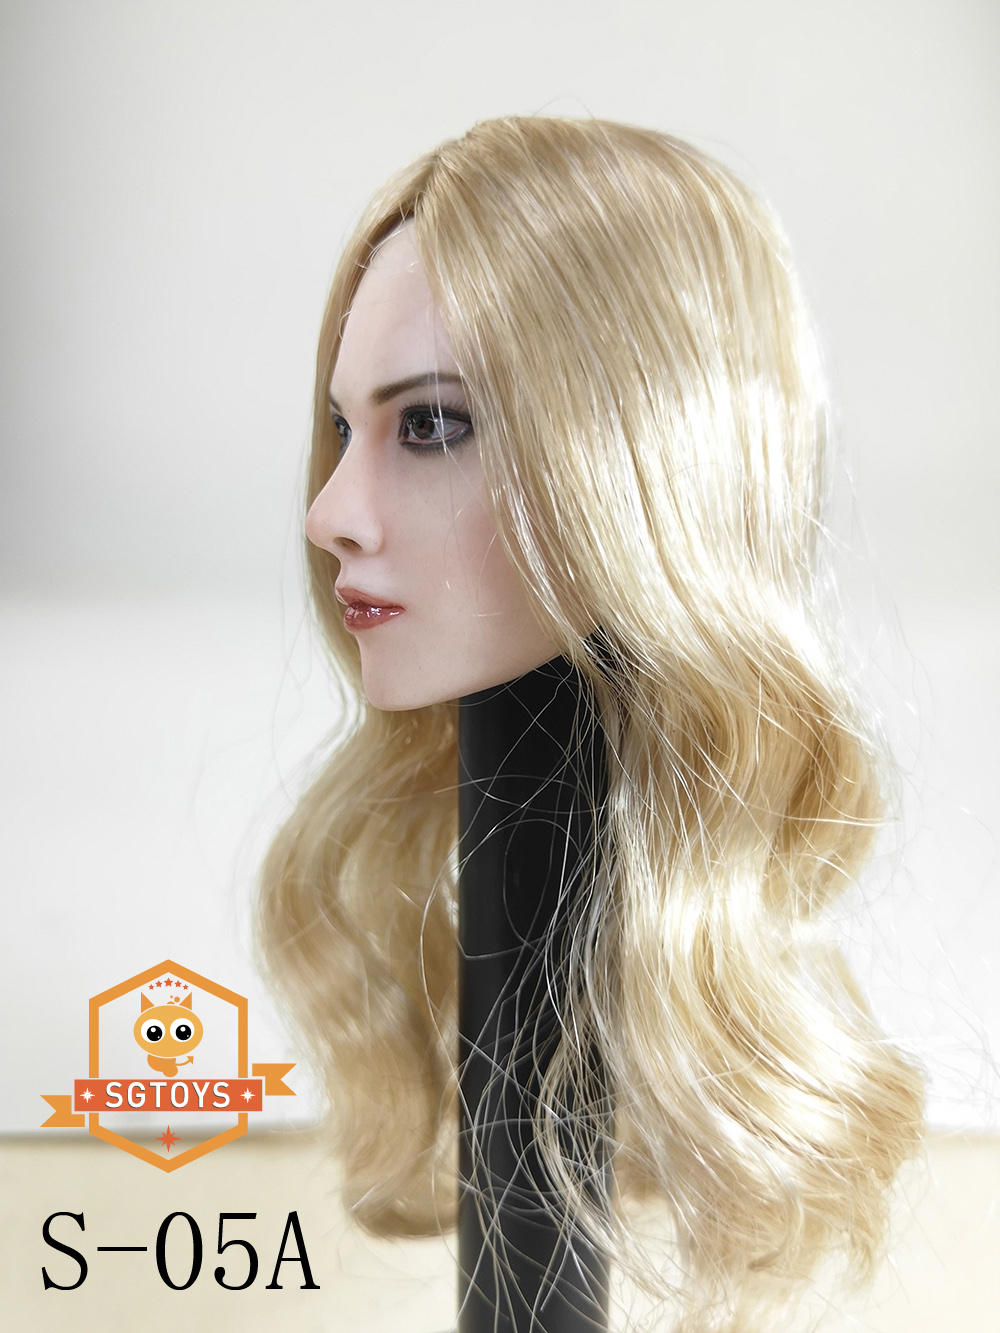 NEW PRODUCT: SGTOYS New product: 1/6 Female head carving S-05# - Three hairstyles (for TBLeague body) 3148